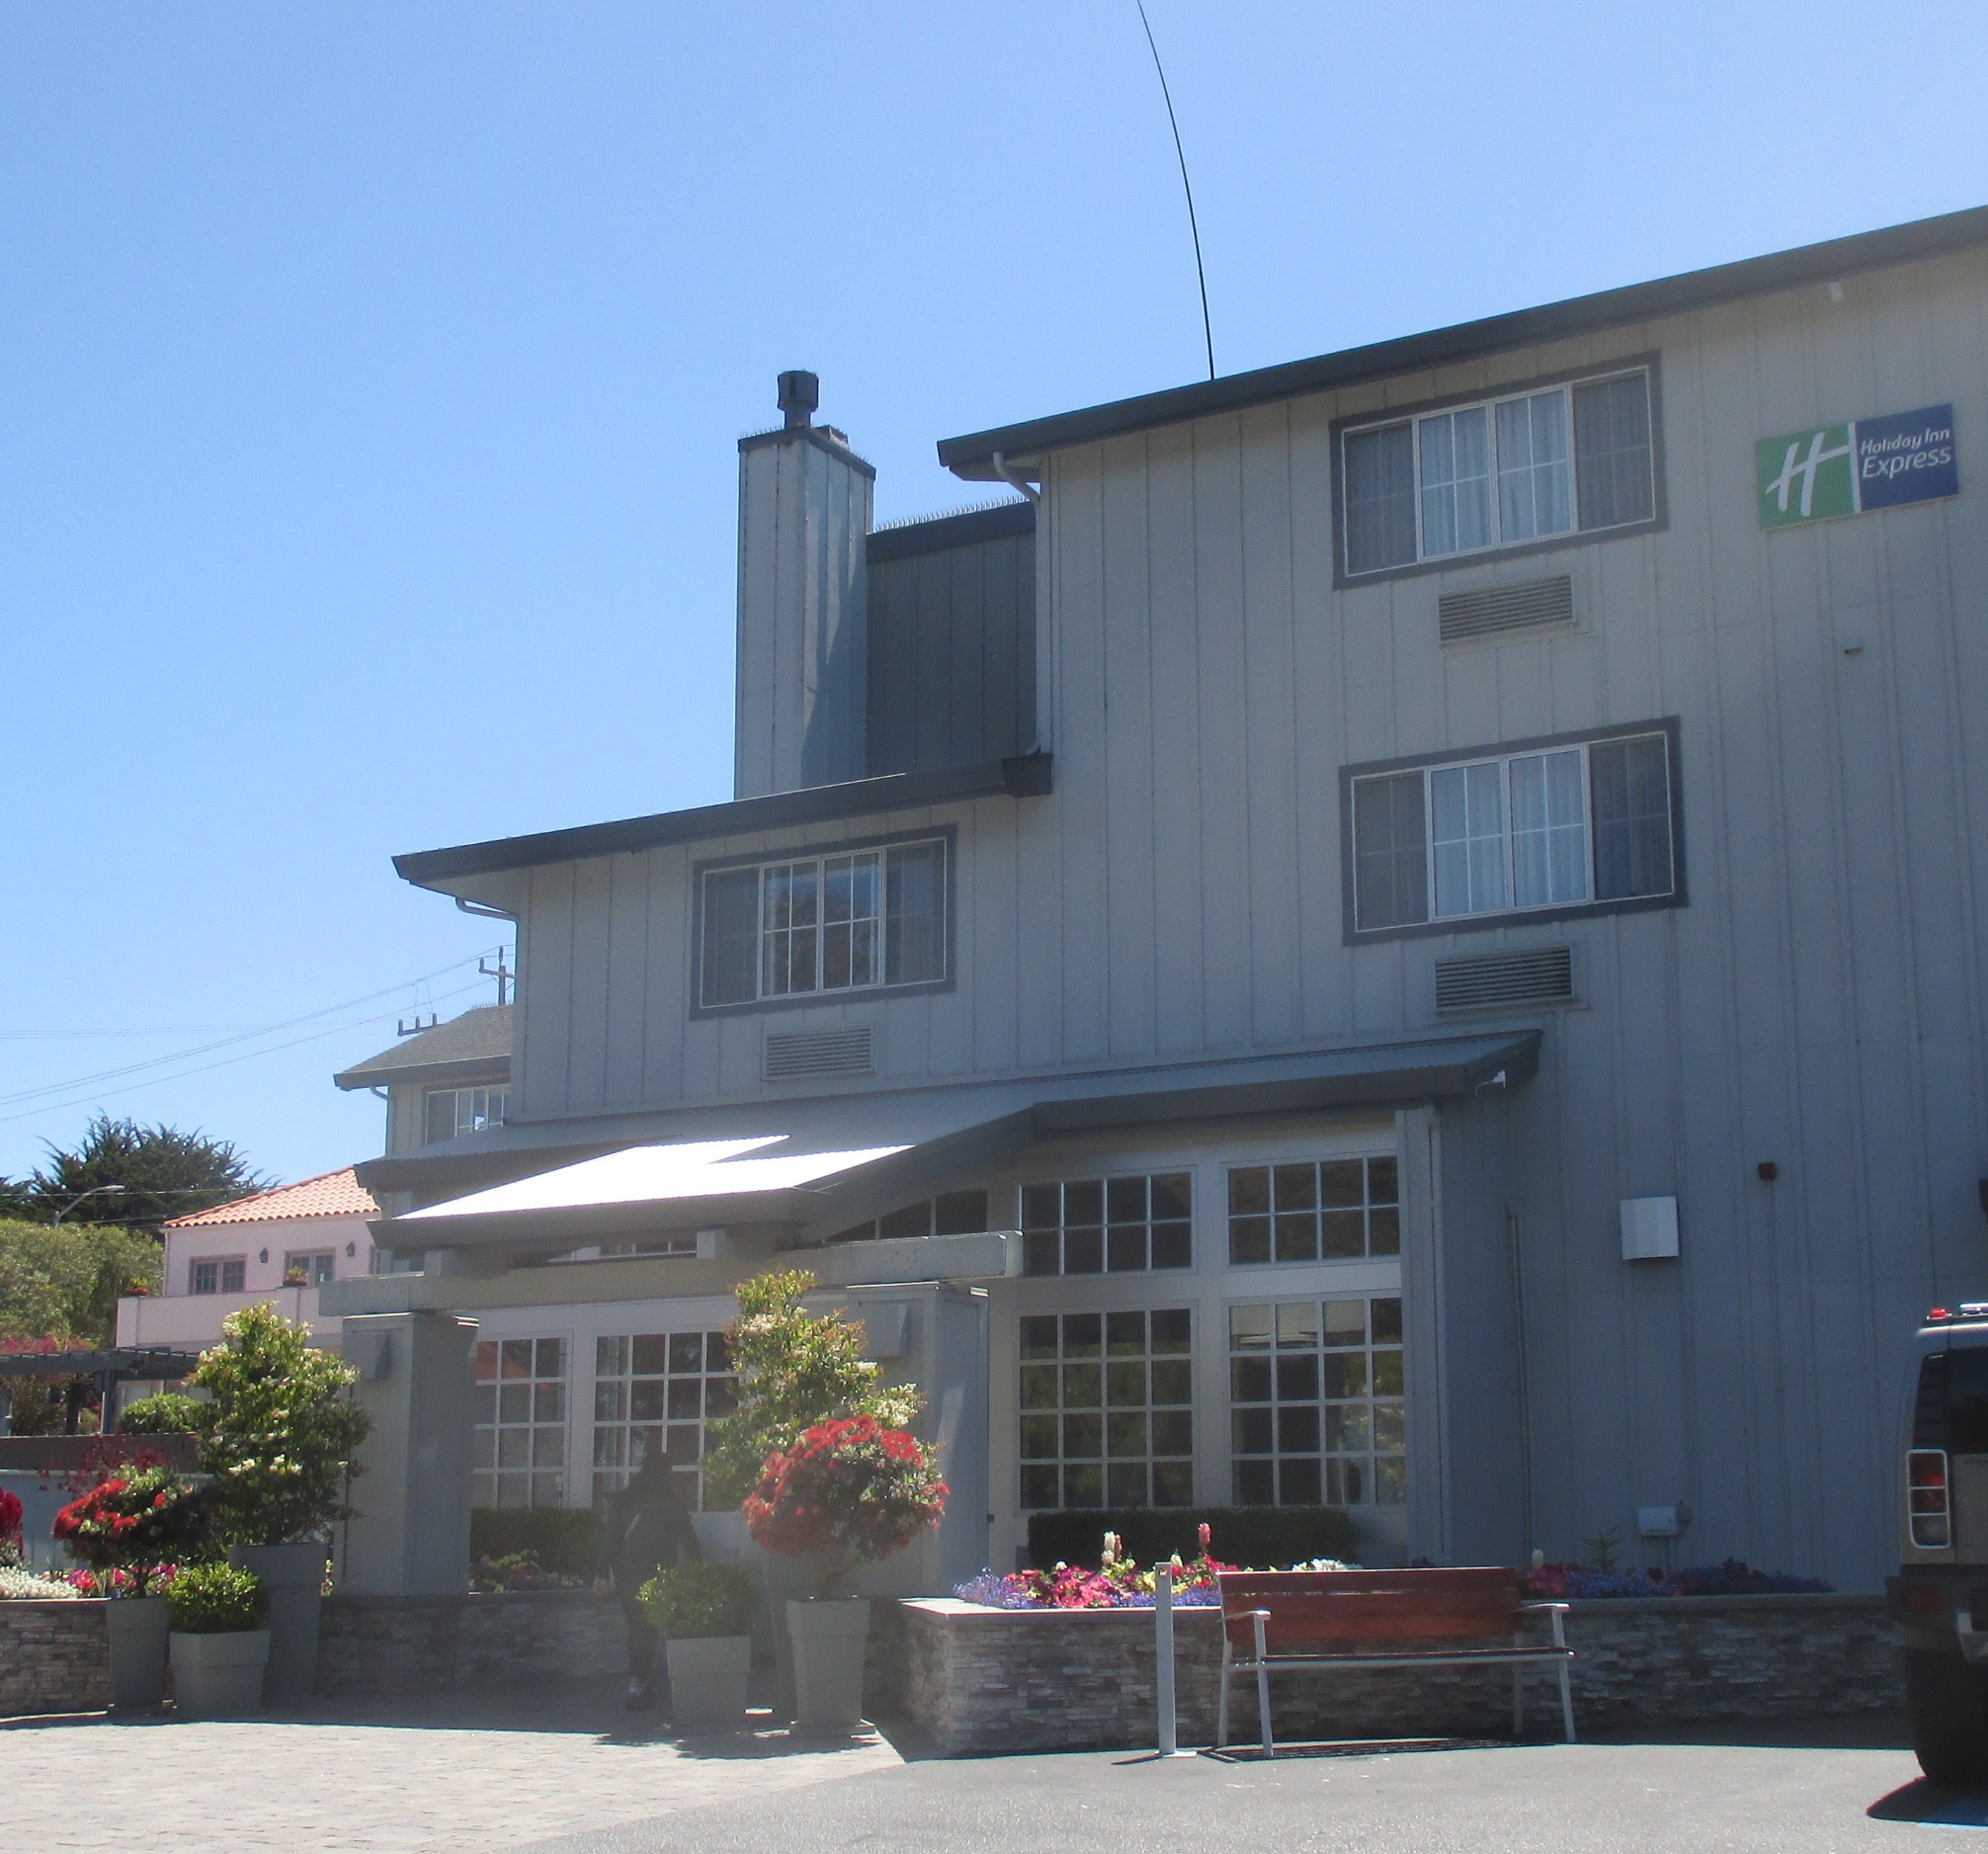 image of the Holiday Inn Express in Monterey